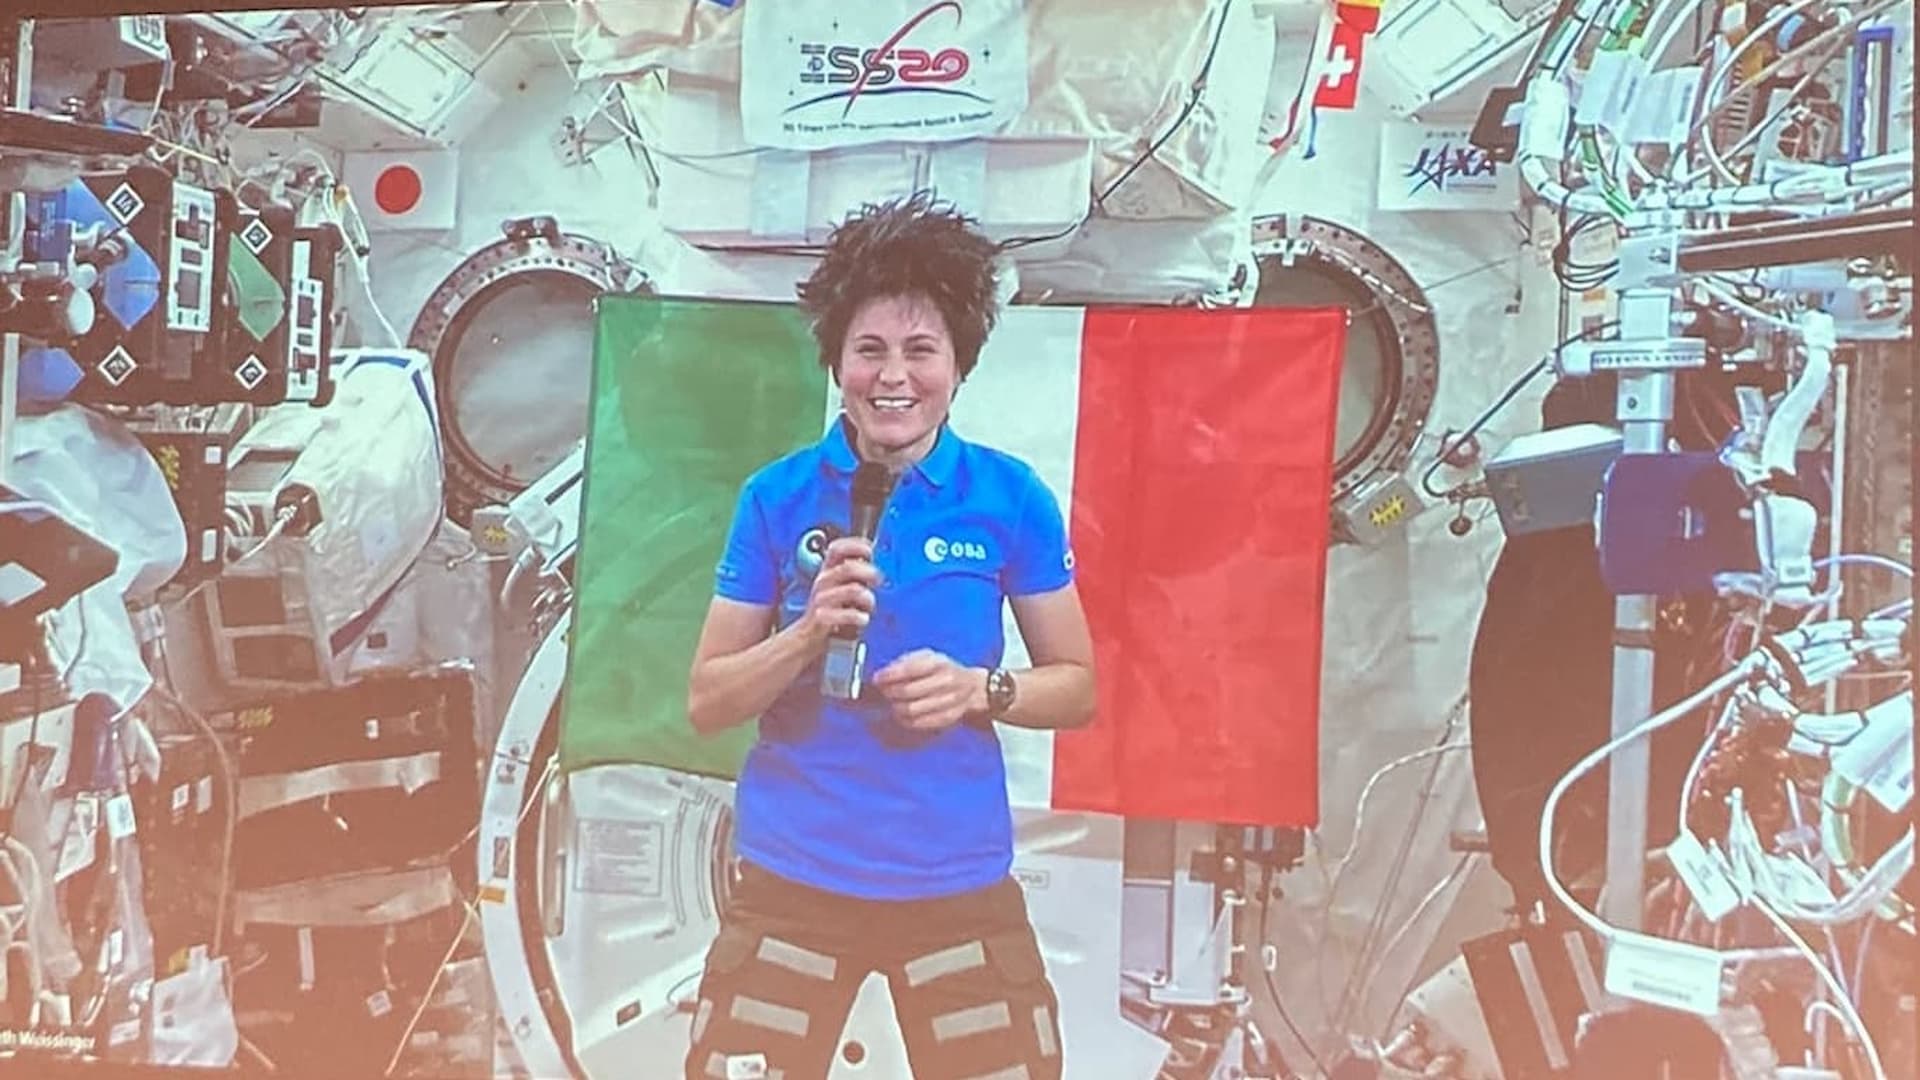 SECOND MEETING IN SPACE WITH ASTROSAMANTHA